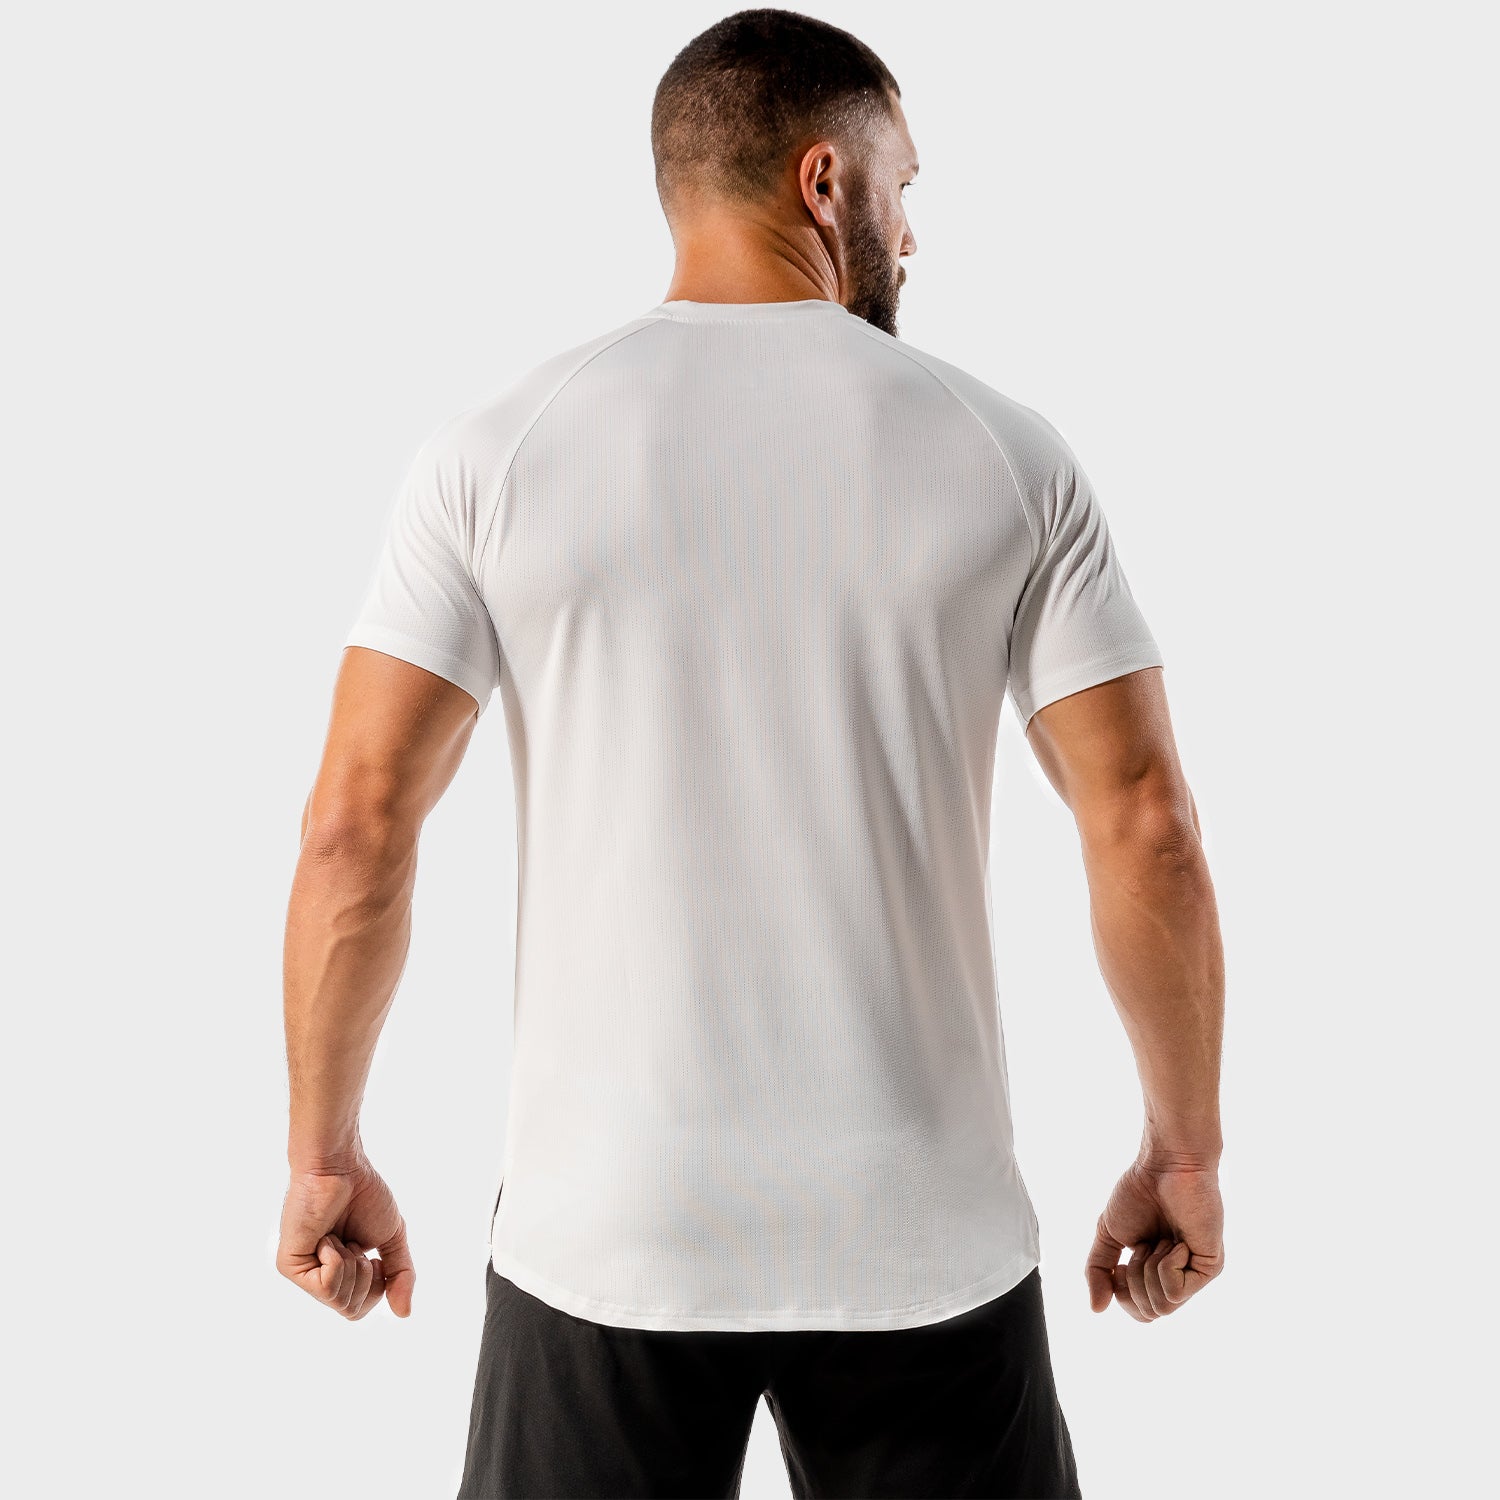 squatwolf-gym-wear-core-mesh-tee-white-workout-shirts-for-men